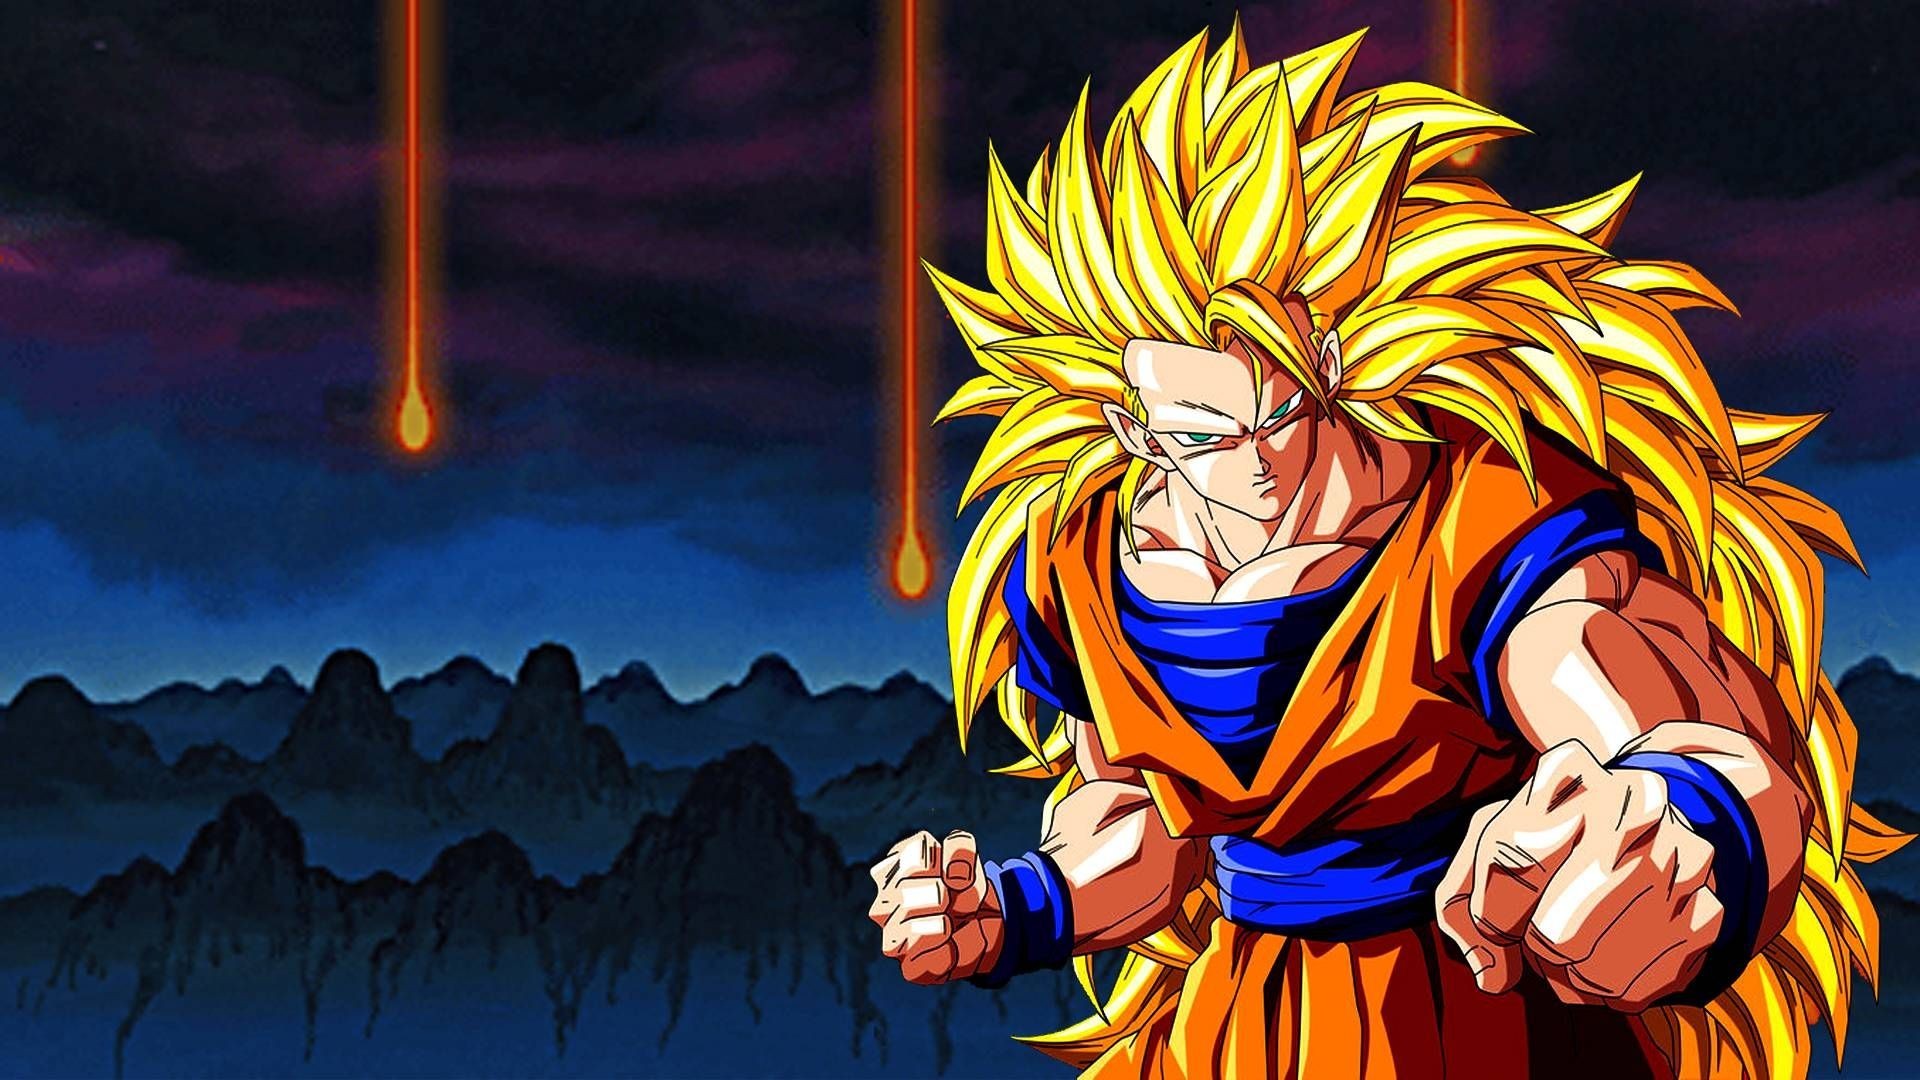 Desktop Wallpaper Goku SSJ3 with image resolution 1920x1080 pixel. You can use this wallpaper as background for your desktop Computer Screensavers, Android or iPhone smartphones